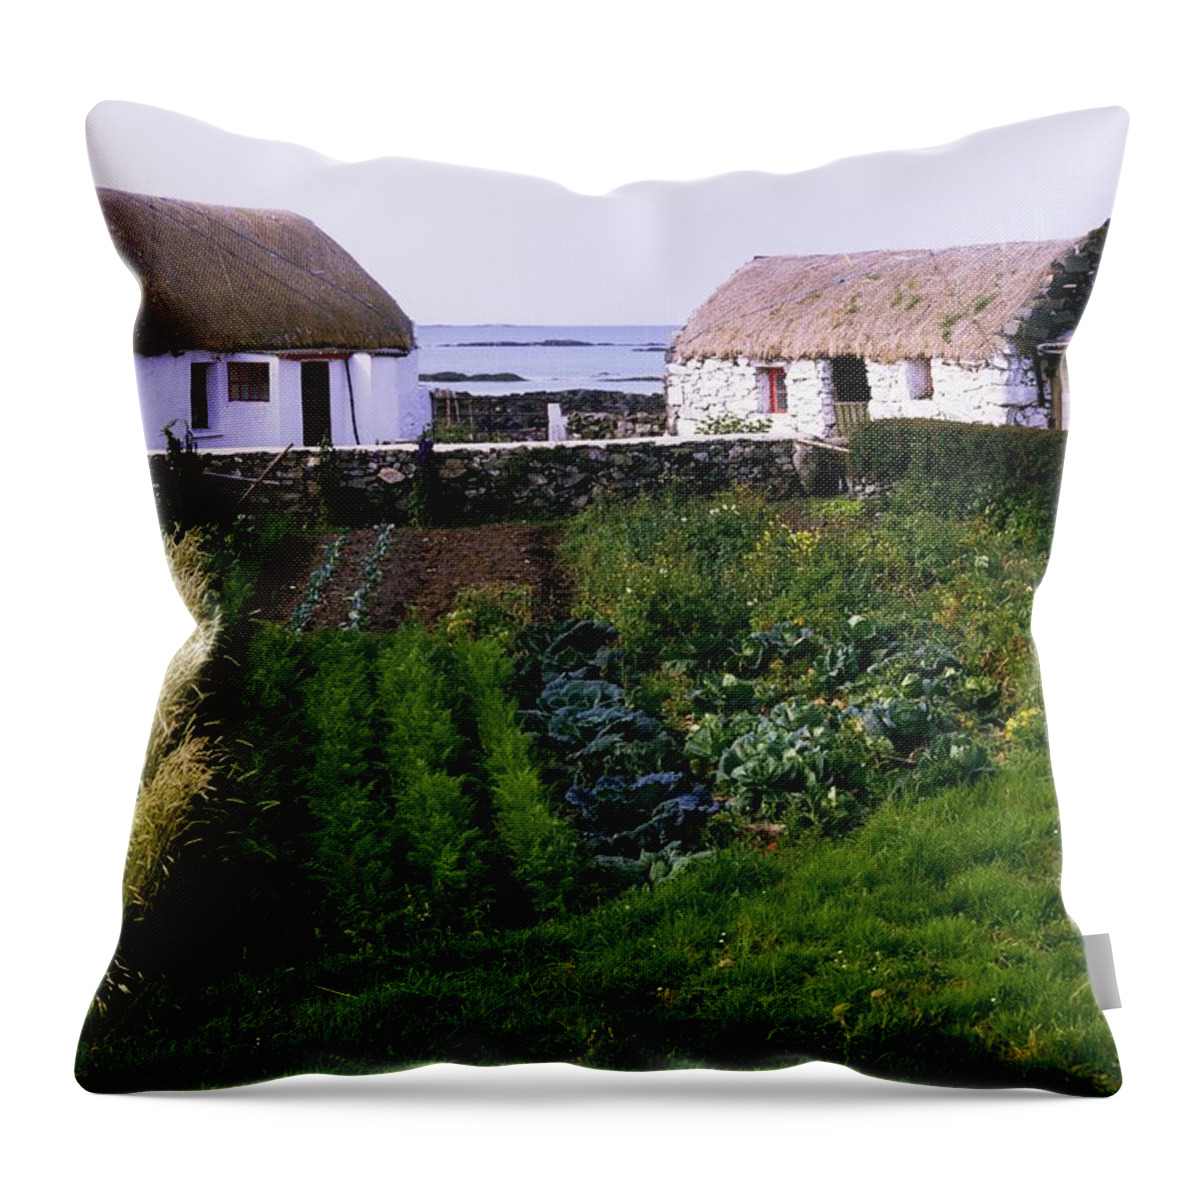 Architecture Throw Pillow featuring the photograph Traditional Cottages, Co Galway, Ireland #1 by The Irish Image Collection 